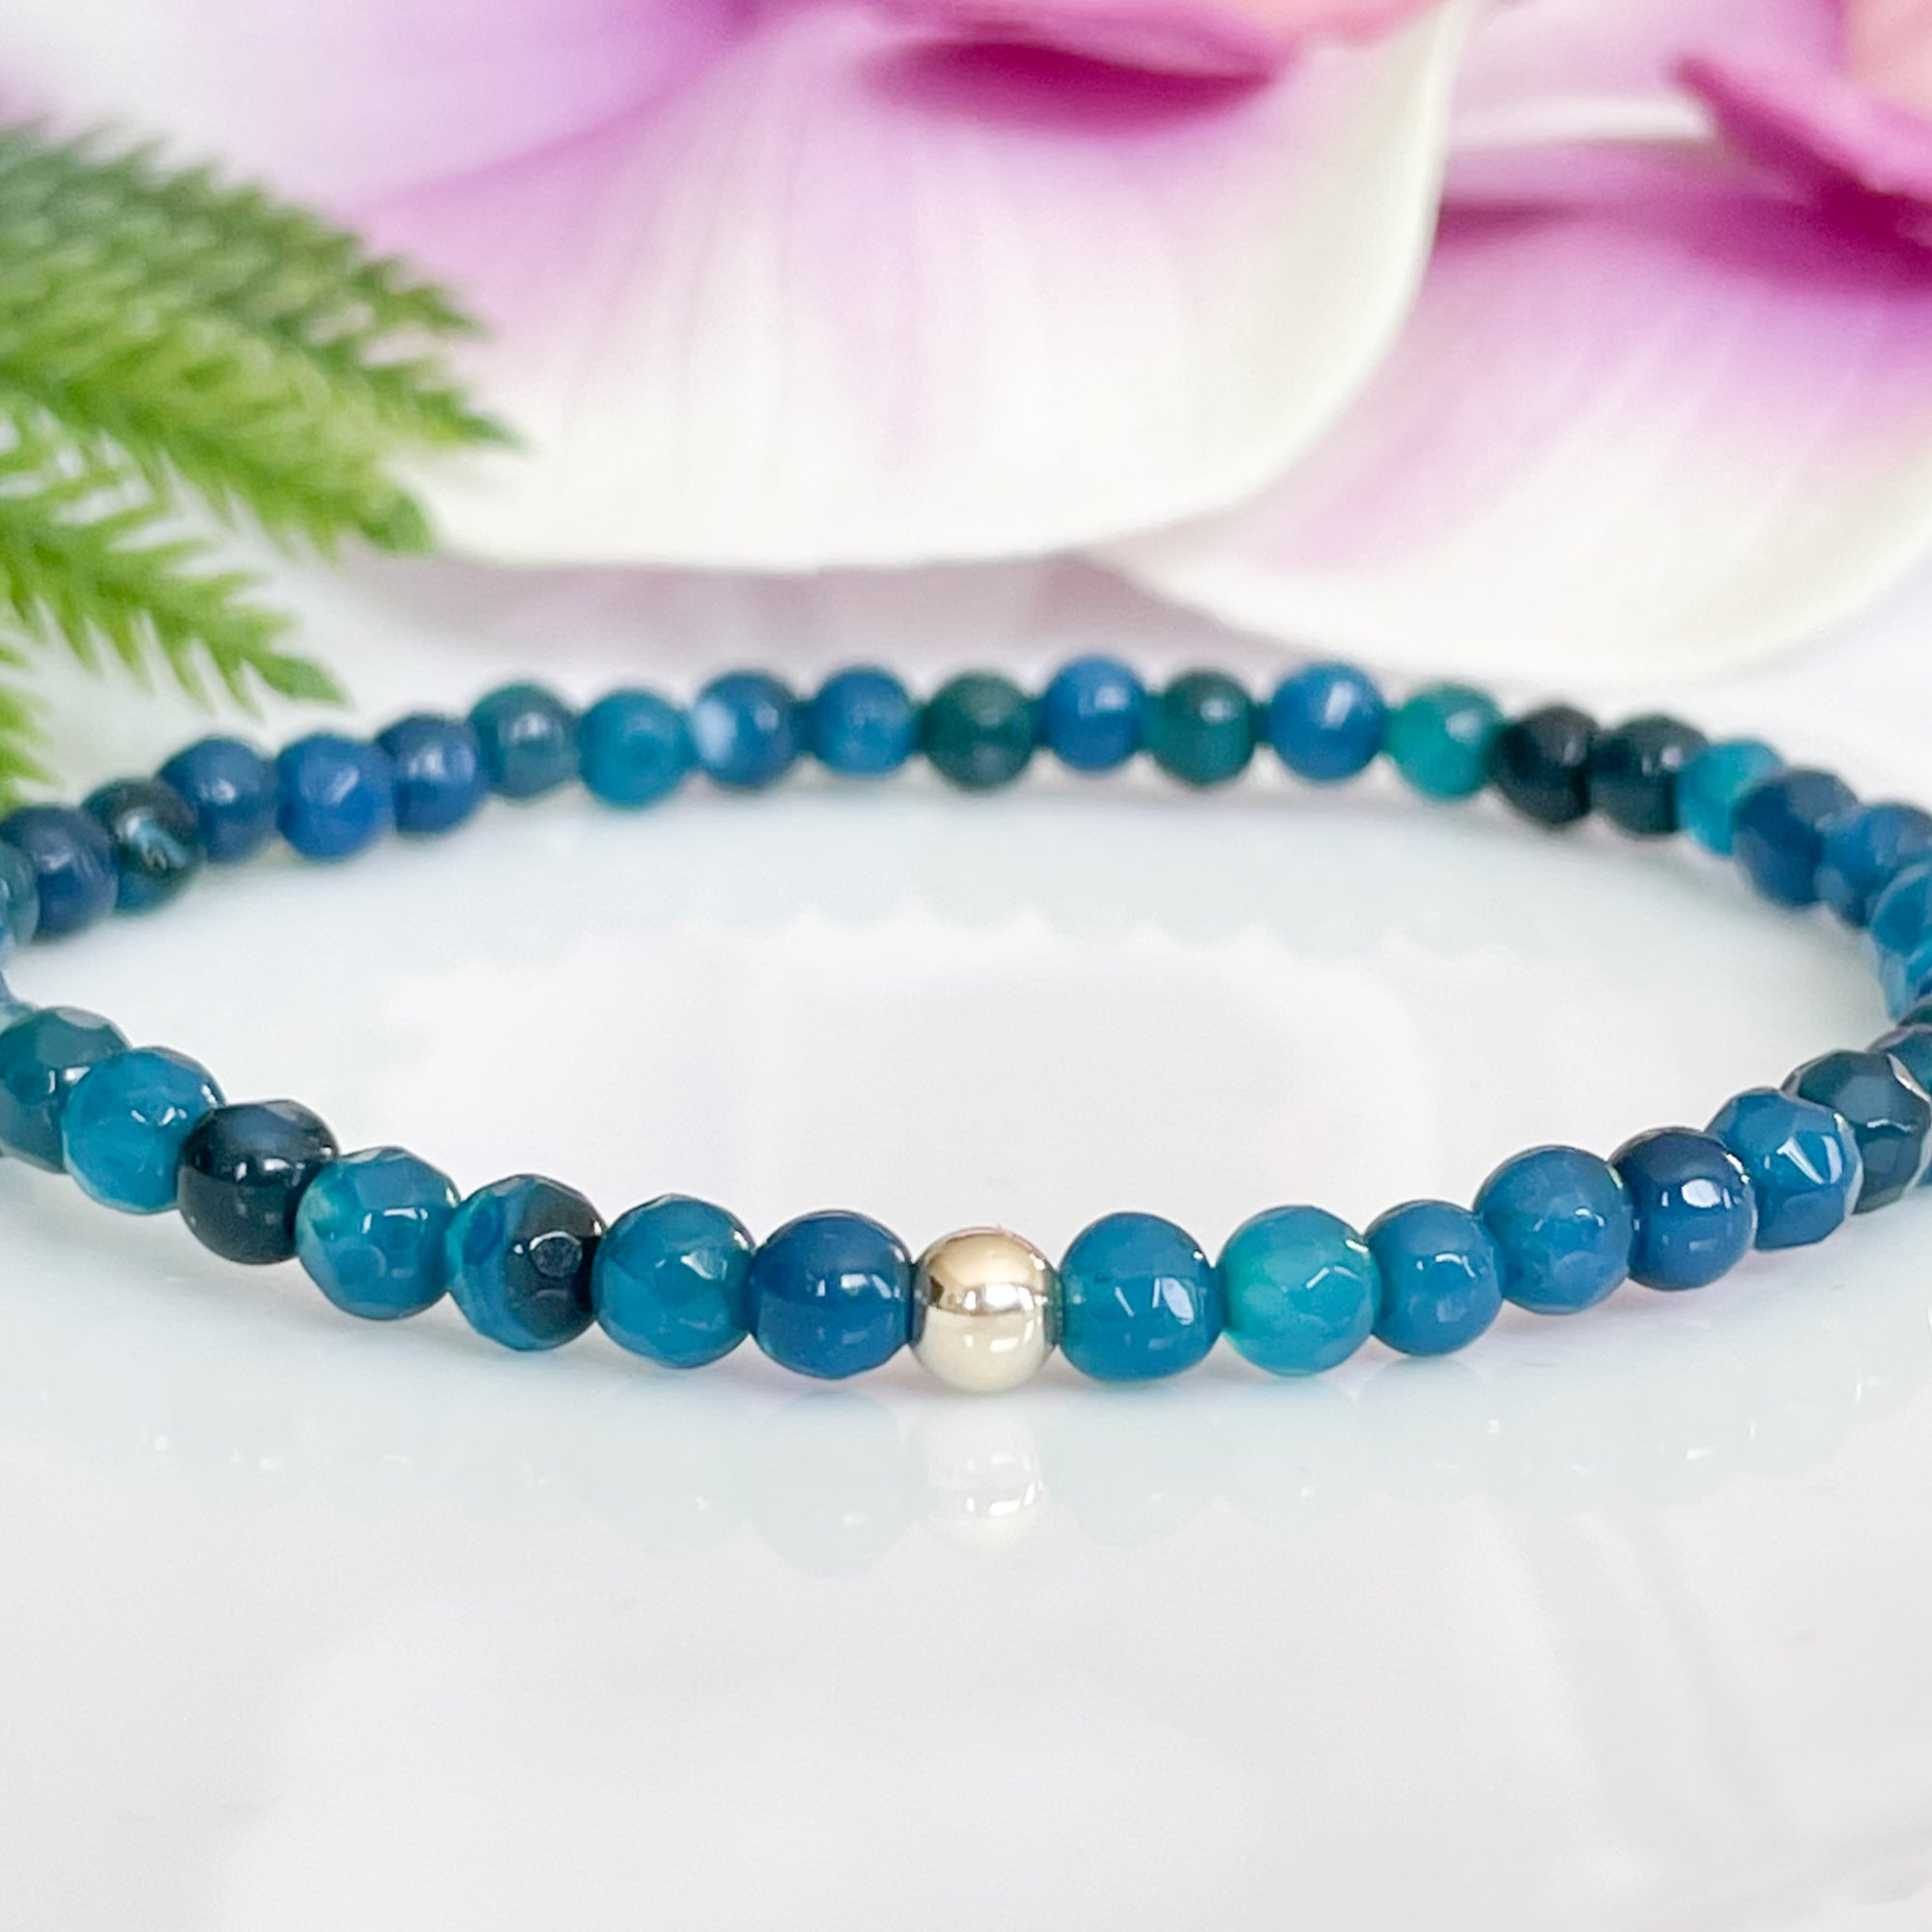 4mm Blue Agate Beaded Bracelet with Gold Accent